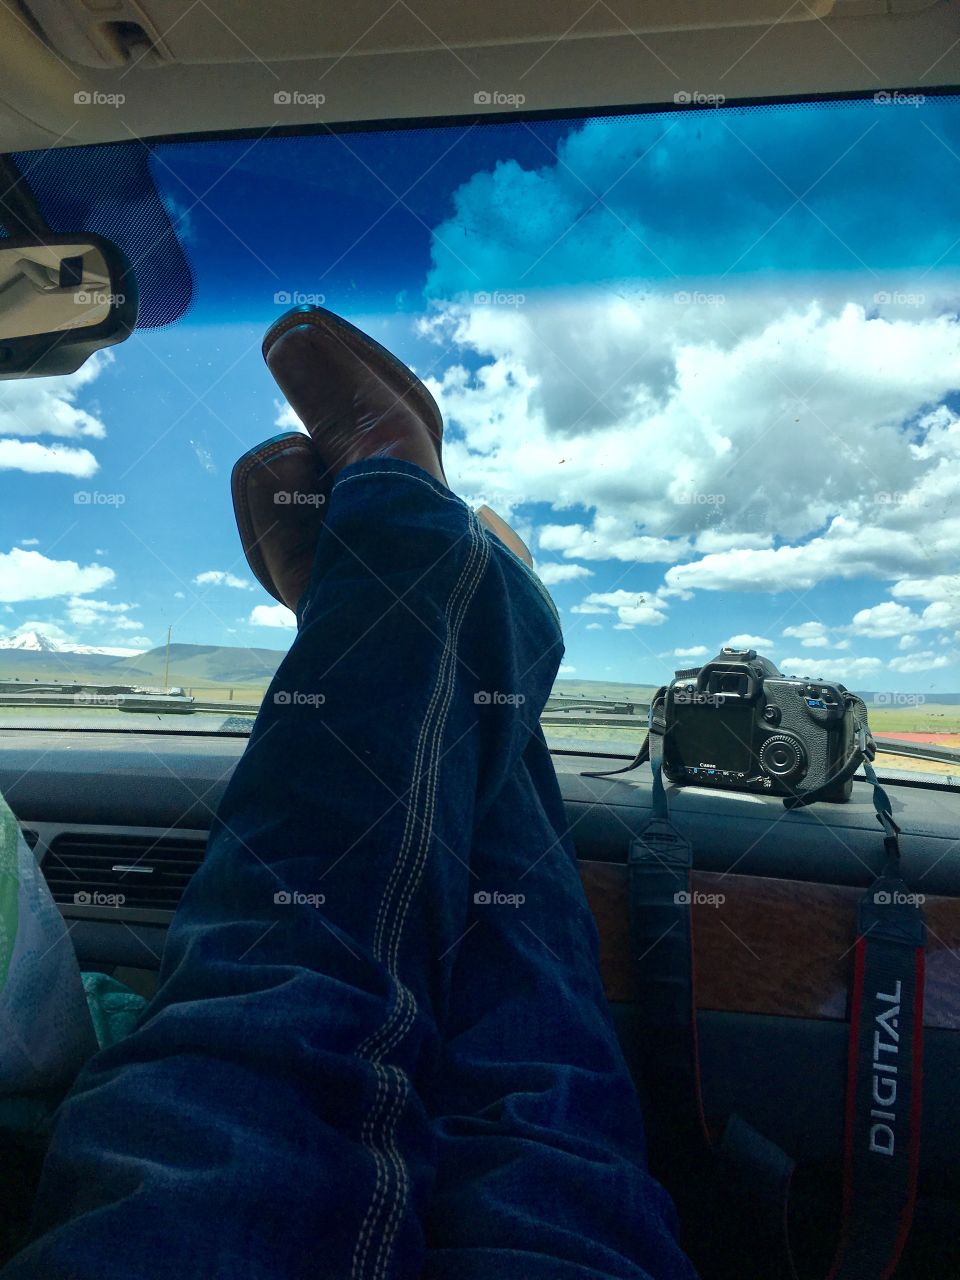 Relaxing time chilling in the wide country side. Taking a break from photographing the beautiful views of Wyoming. Me and my  Cannon taking a break. Kicking up the cowboy boots in the truck. Peaceful, relaxing way of life.